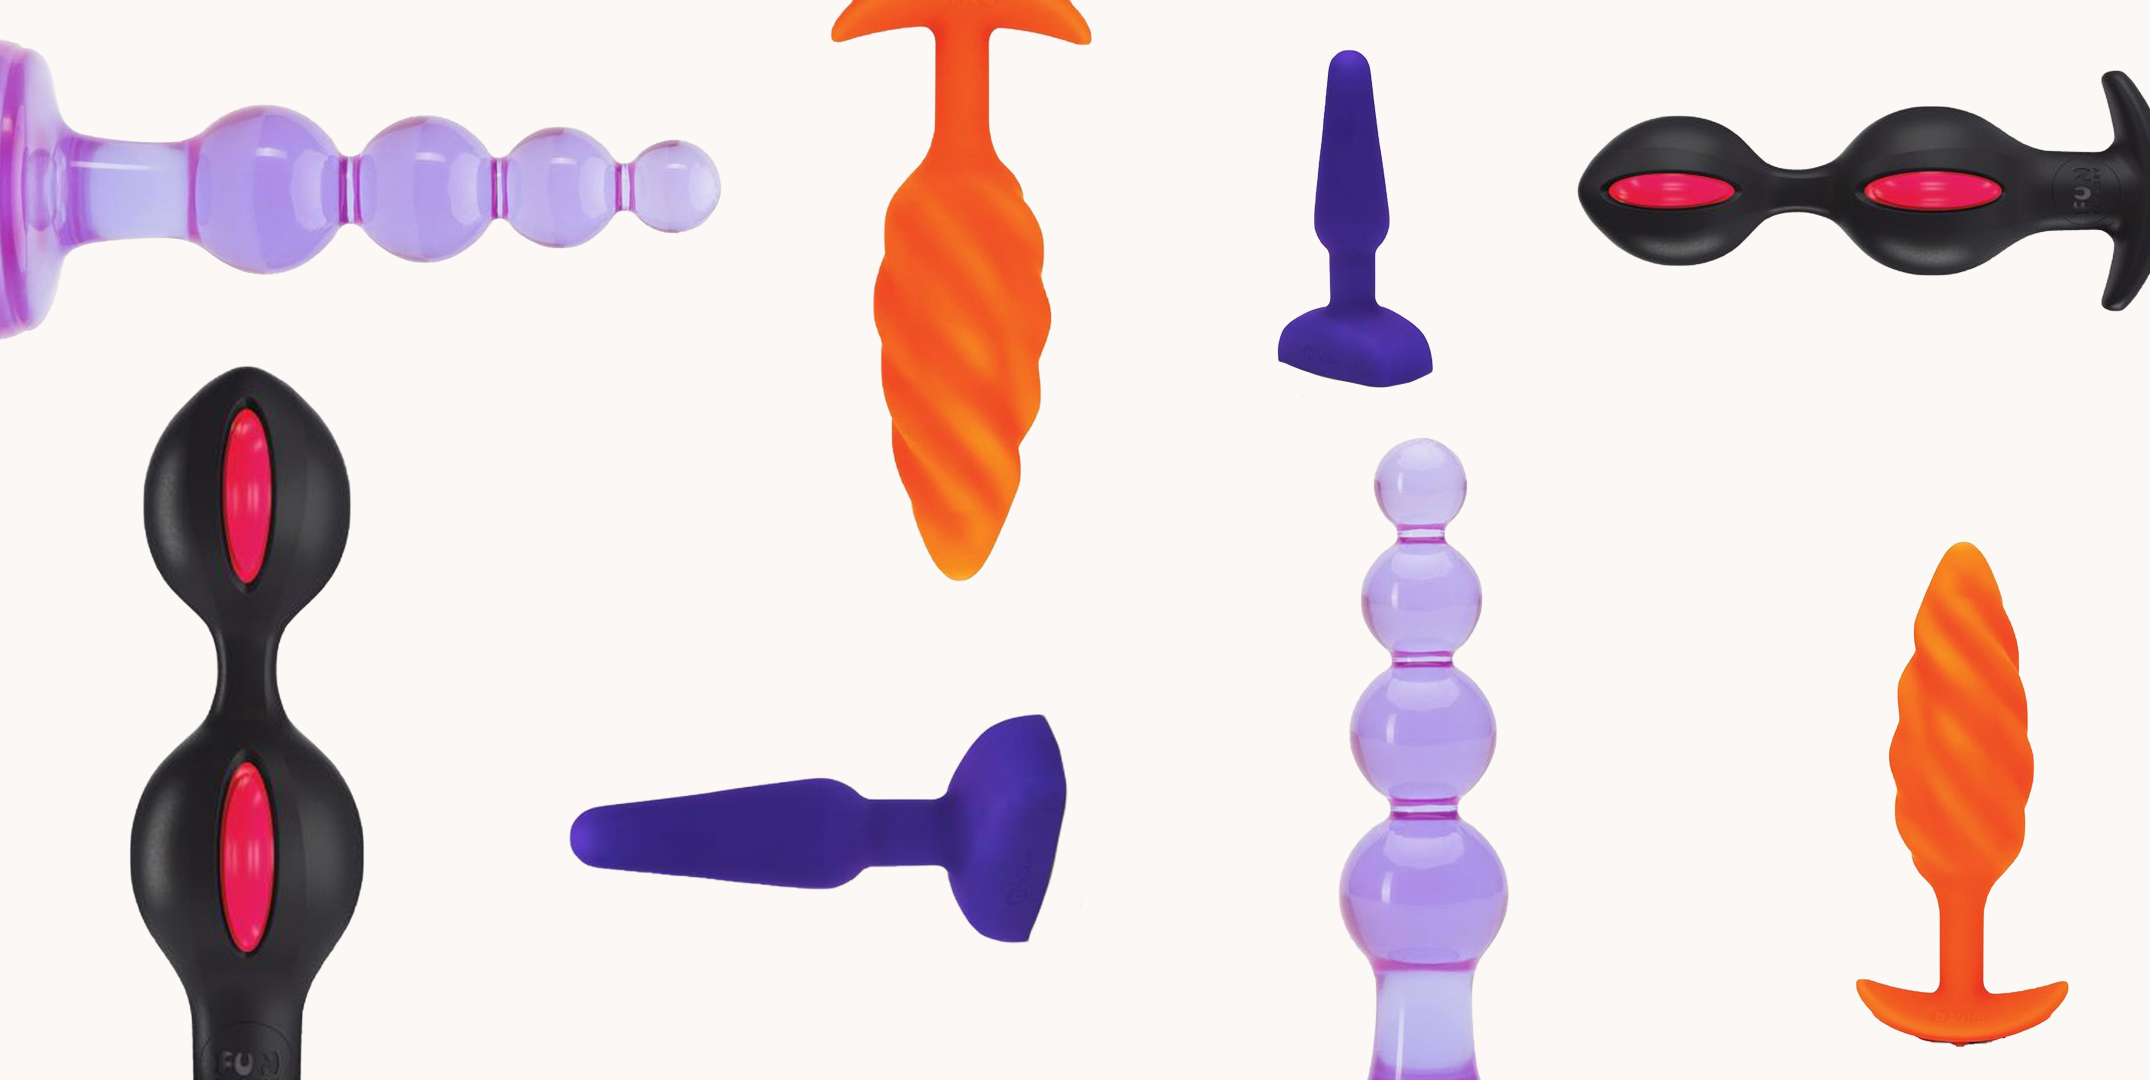 Sexy Anal Objects - 25 Best Anal Sex Toys - Best Butt Plugs, Anal Beads, Vibrators